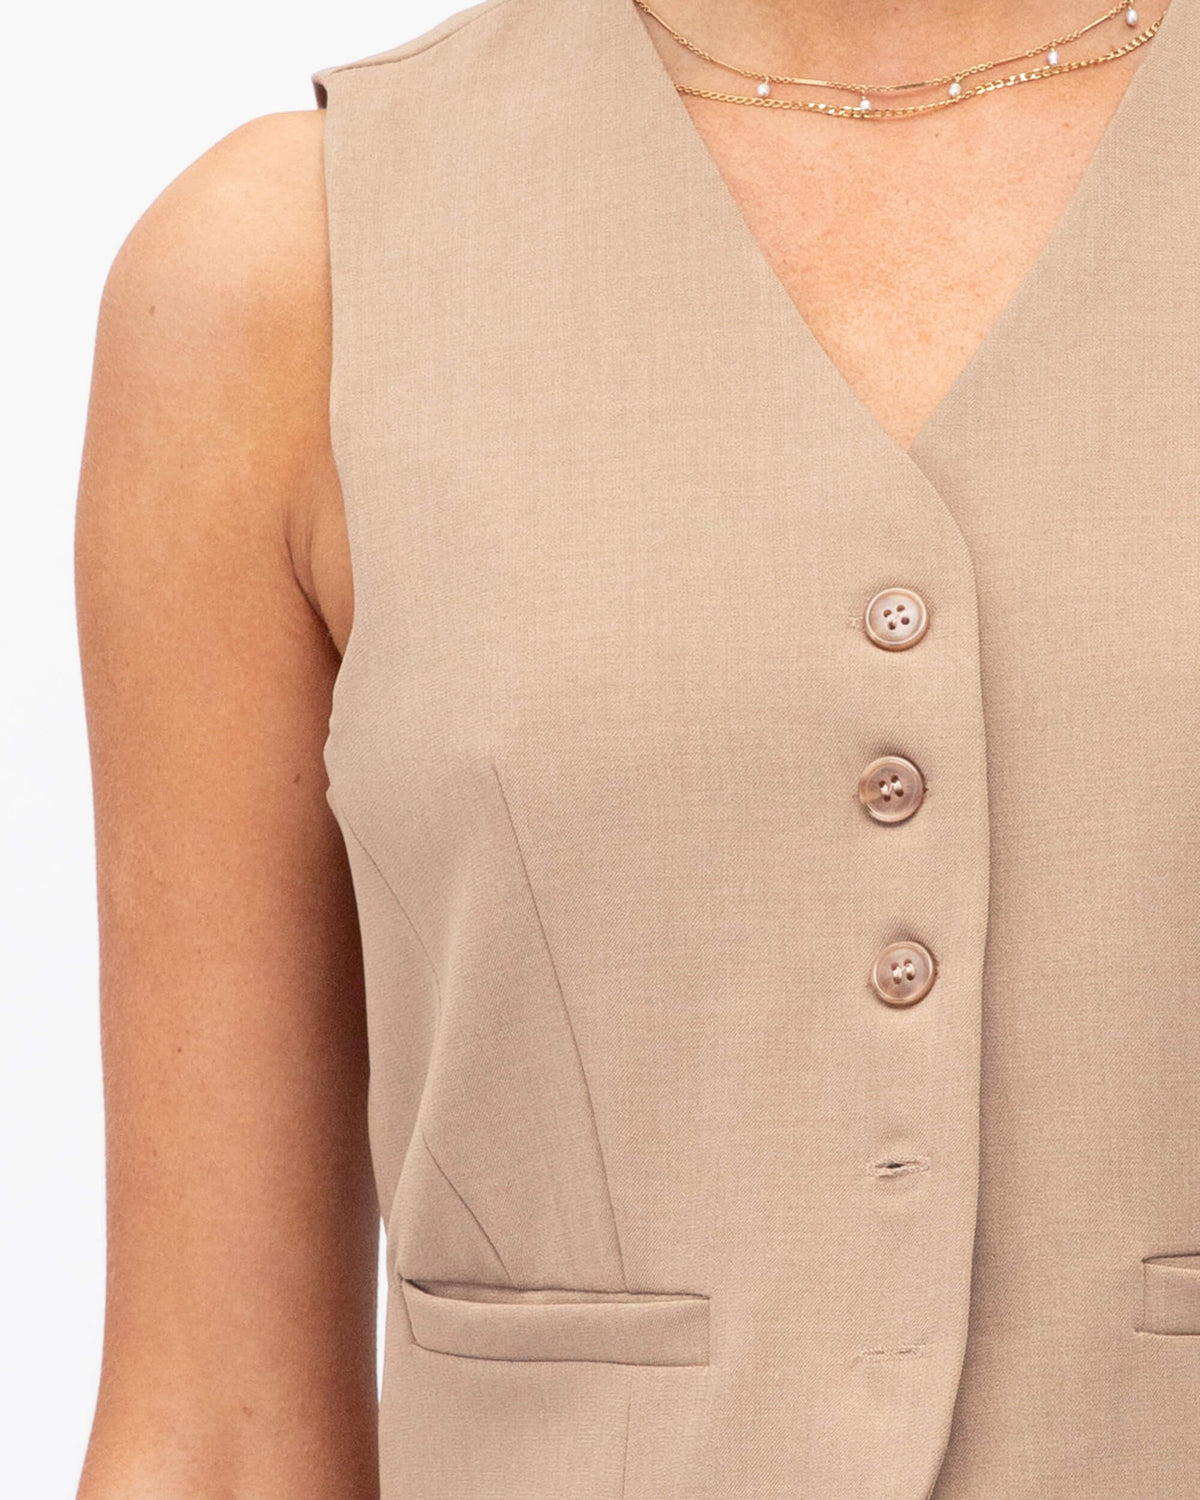 TAUPE CO-ORD SUIT VEST